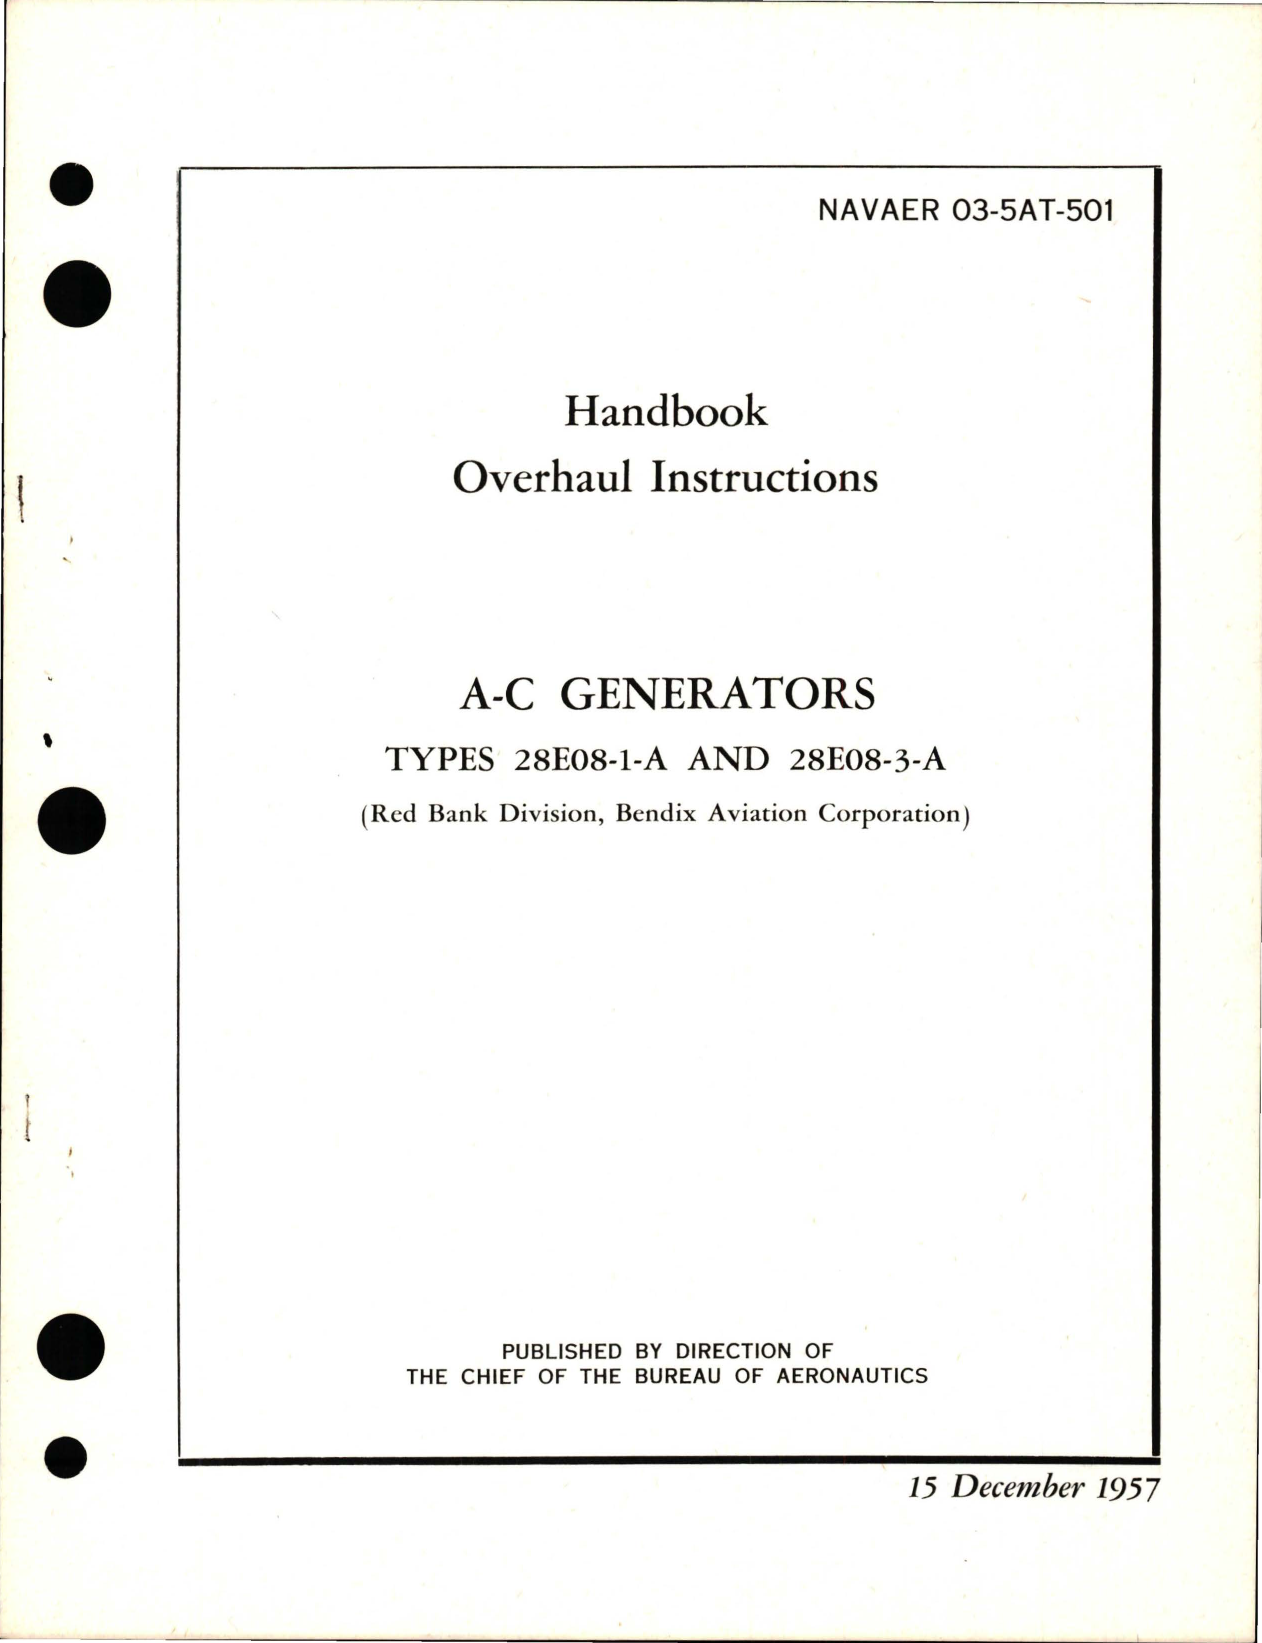 Sample page 1 from AirCorps Library document: Overhaul Instructions for A-C Generators for Types 28E08-1-A and 28E08-3-A